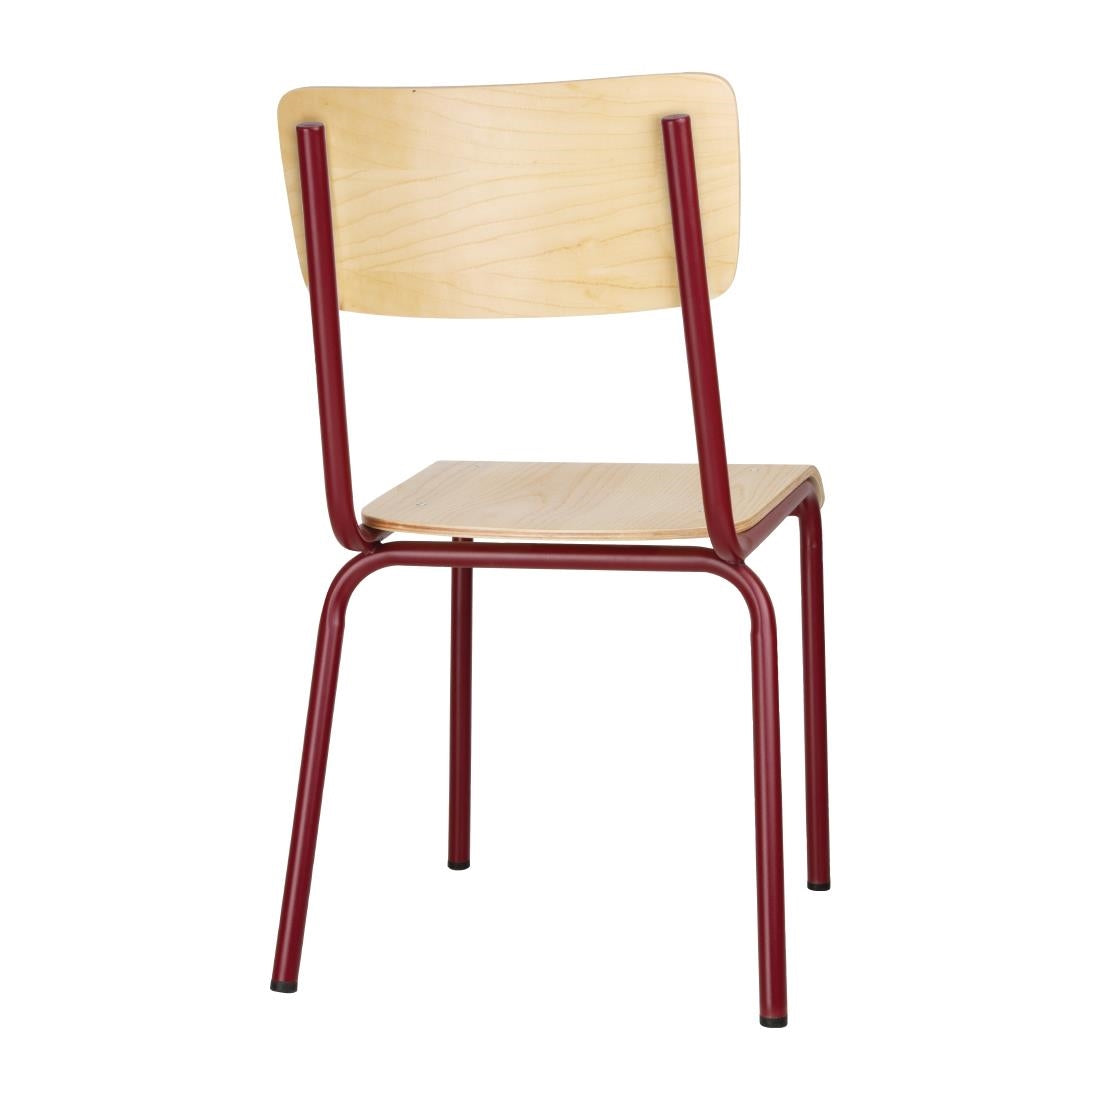 Bolero Cantina Side Chairs with Wooden Seat Pad and Backrest (Pack of 4) JD Catering Equipment Solutions Ltd